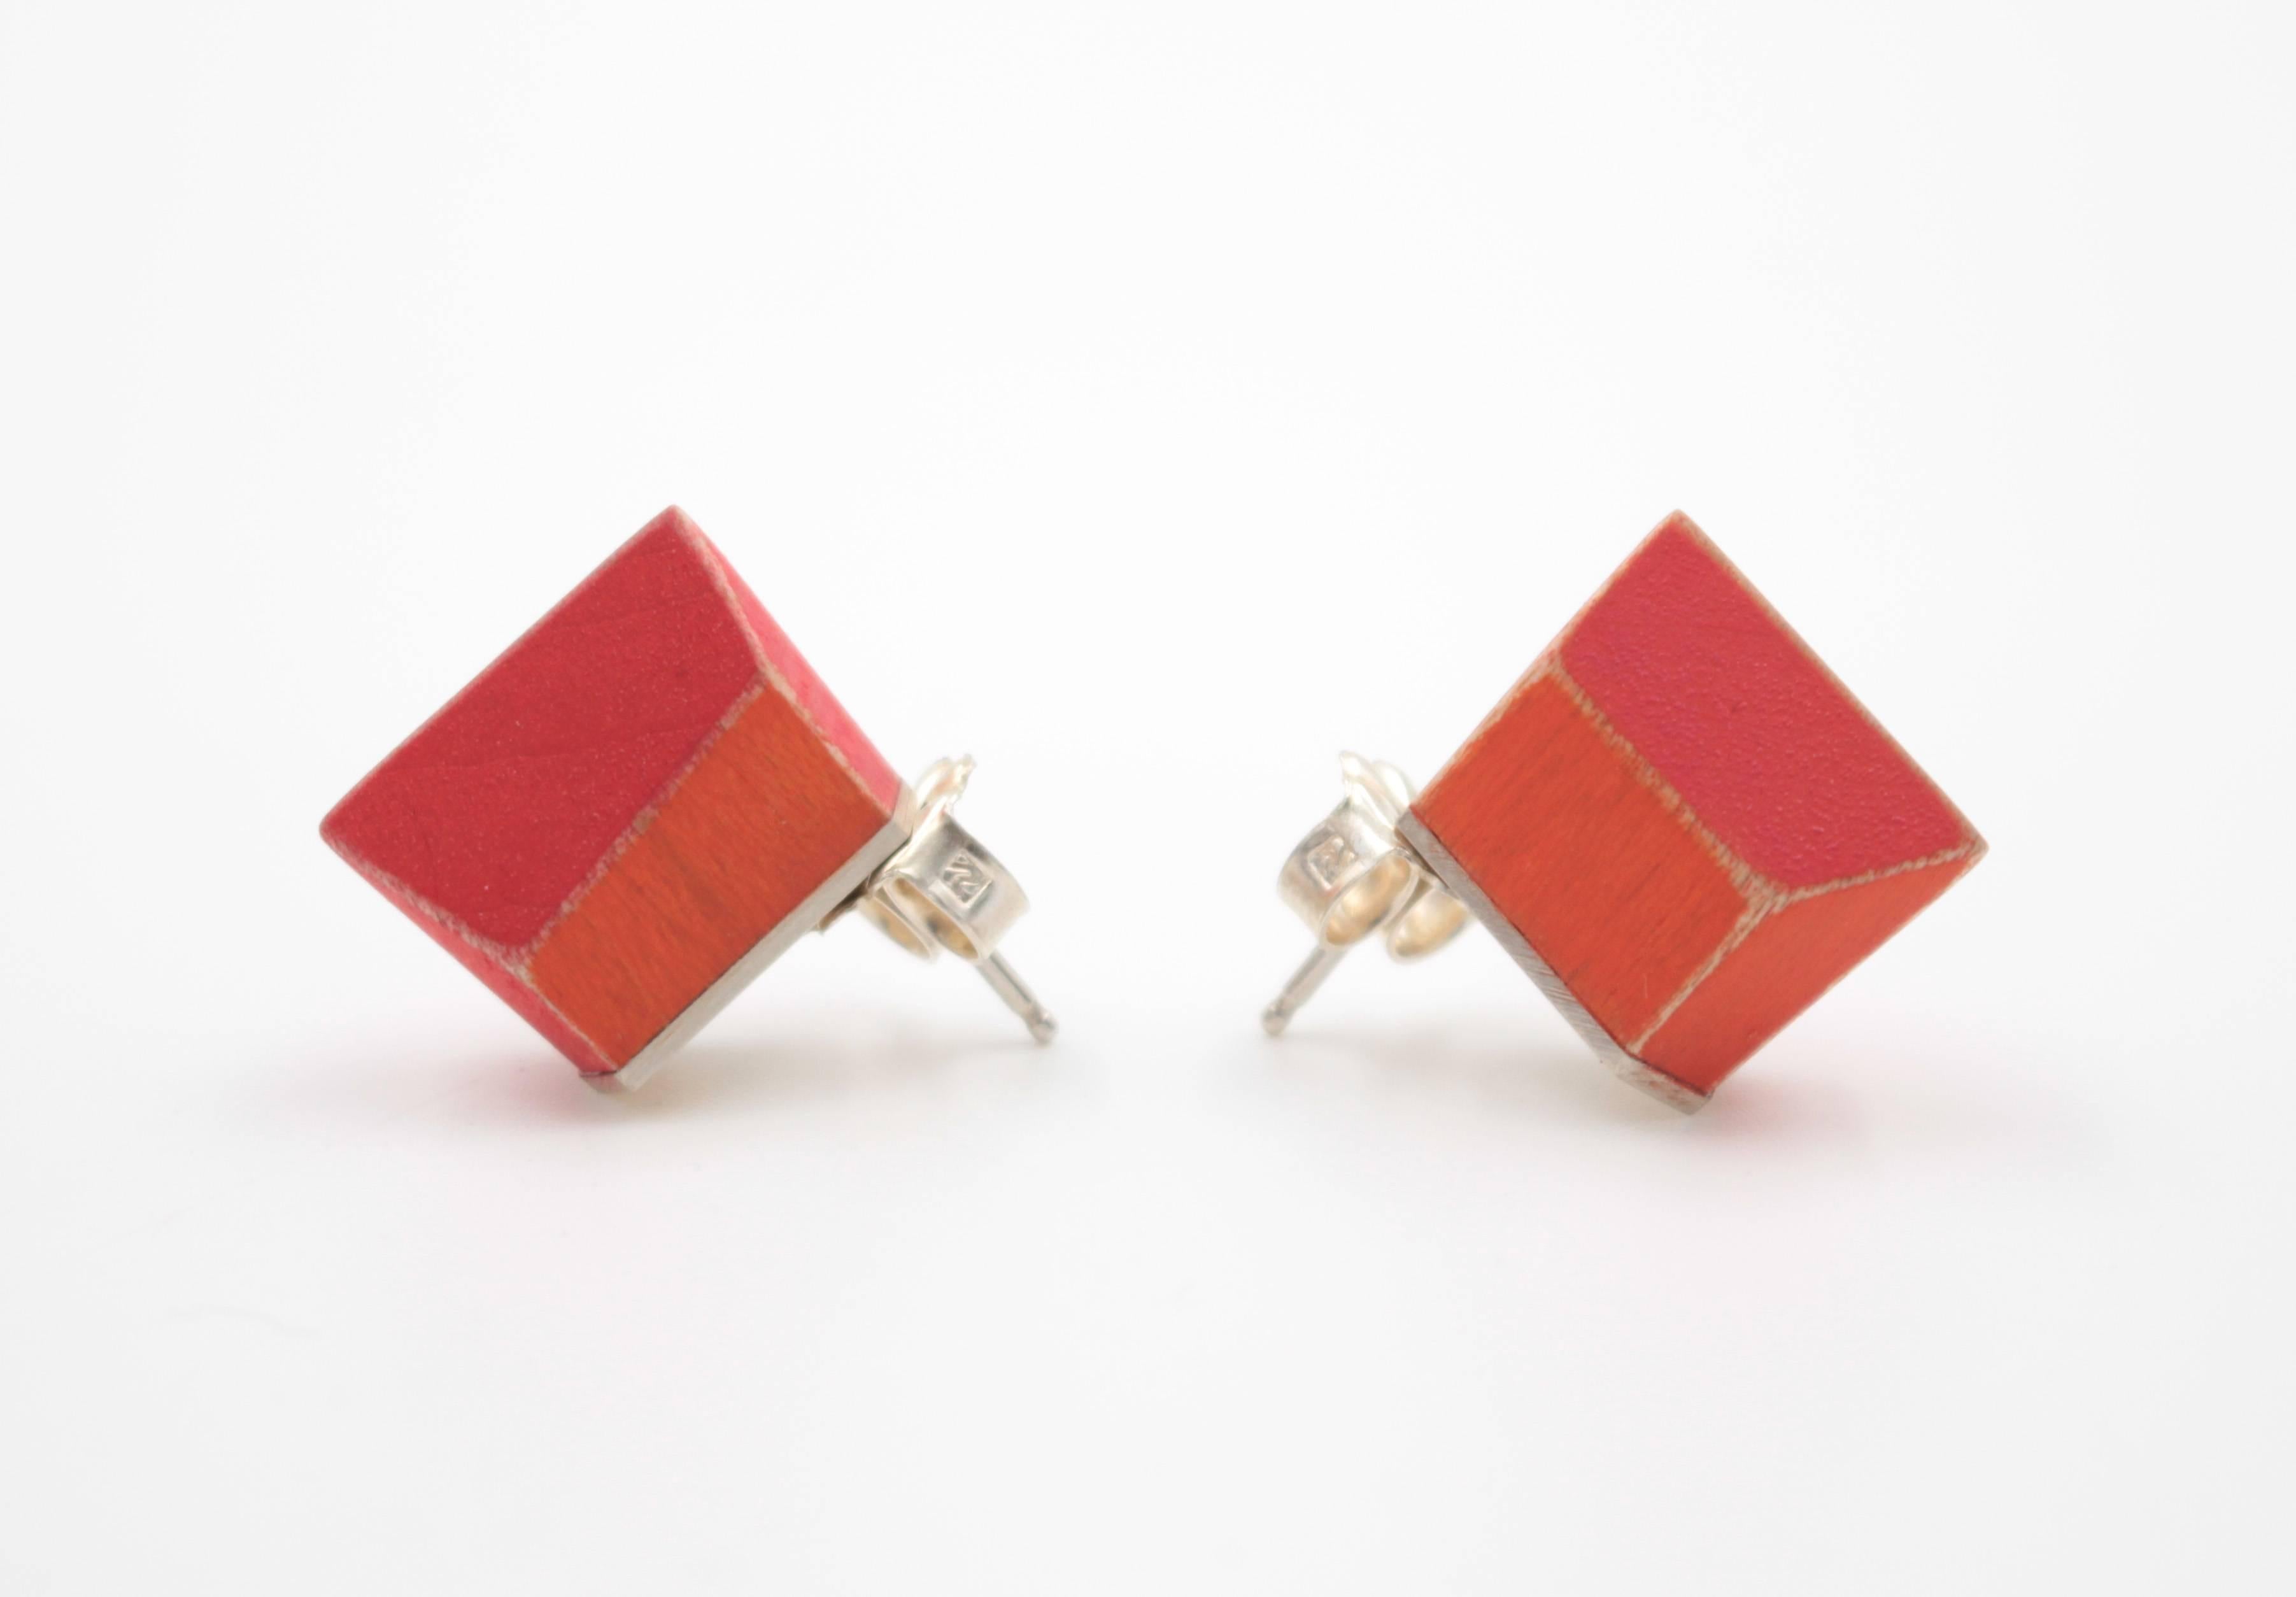 The Sterling Silver and painted maple wood Sugar Chunk Post Earrings measure .5 x .25 x .5 in.